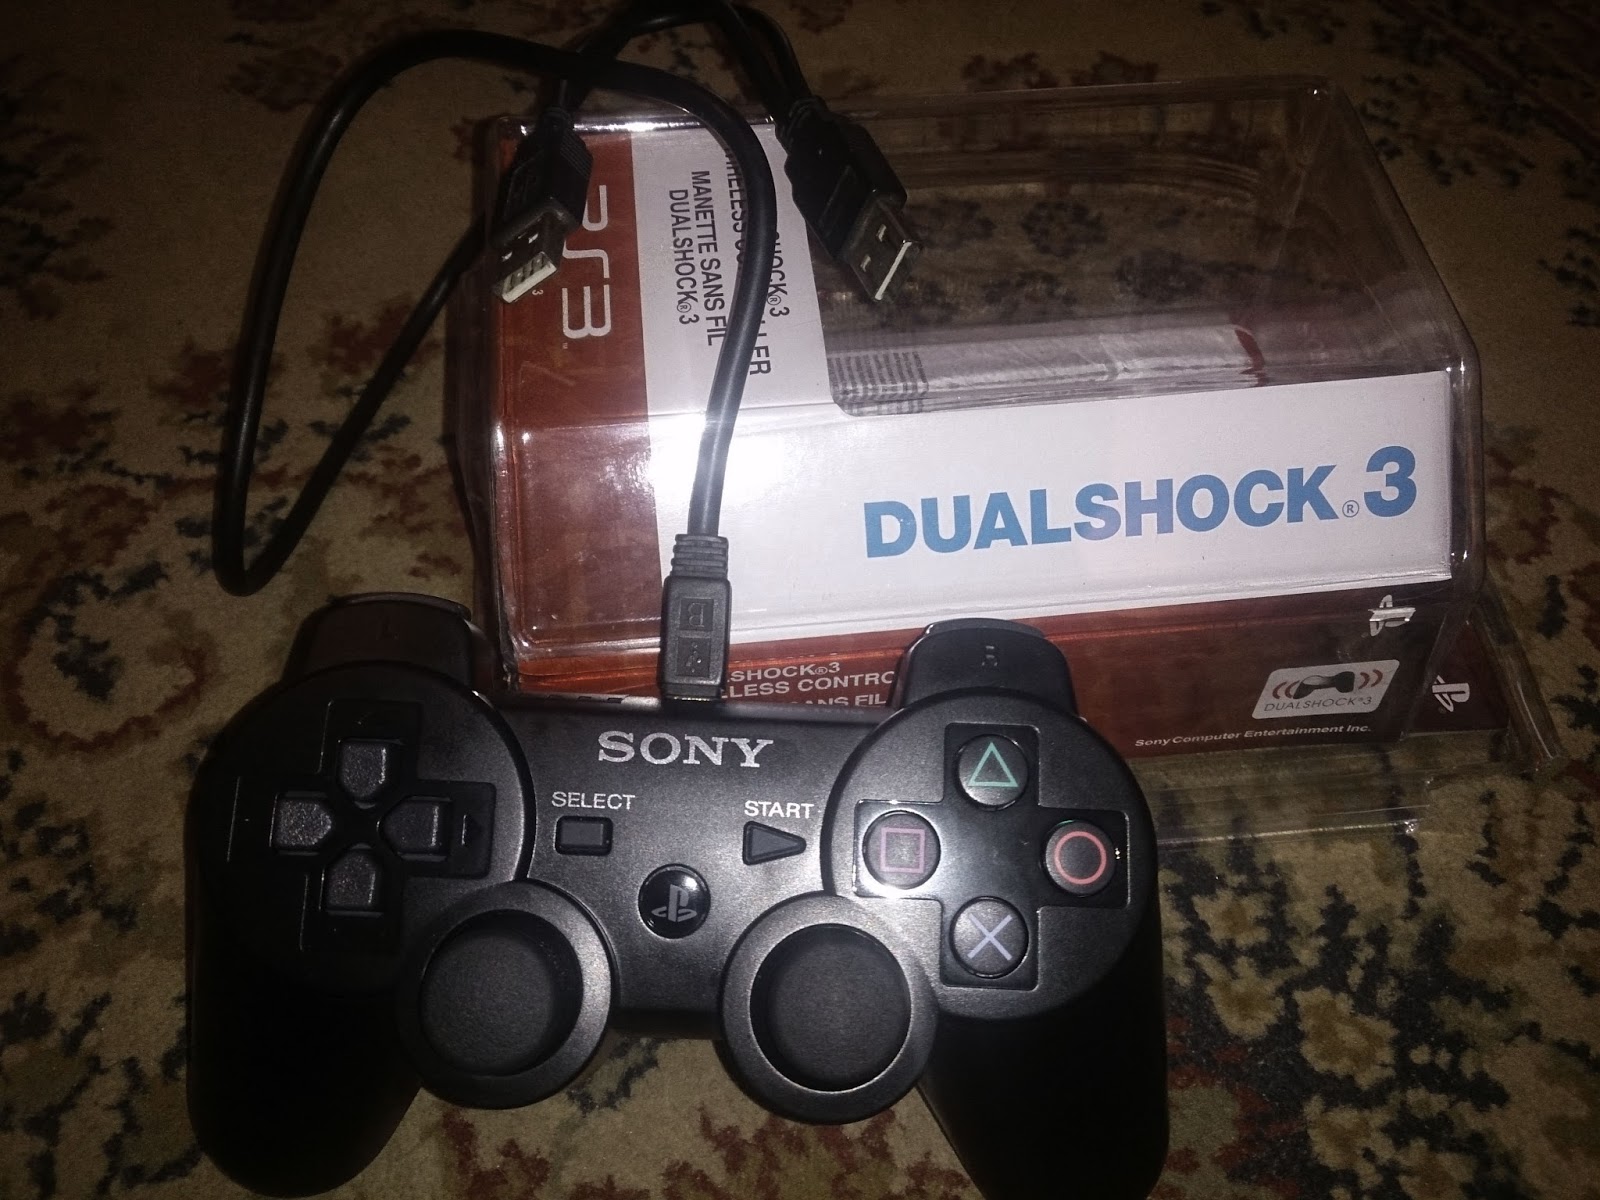 Hates gasformig Blæse How to Connect PS3 Controller (Original/Fake) or Dualshock 4 to your PC |  Kunmi's Space